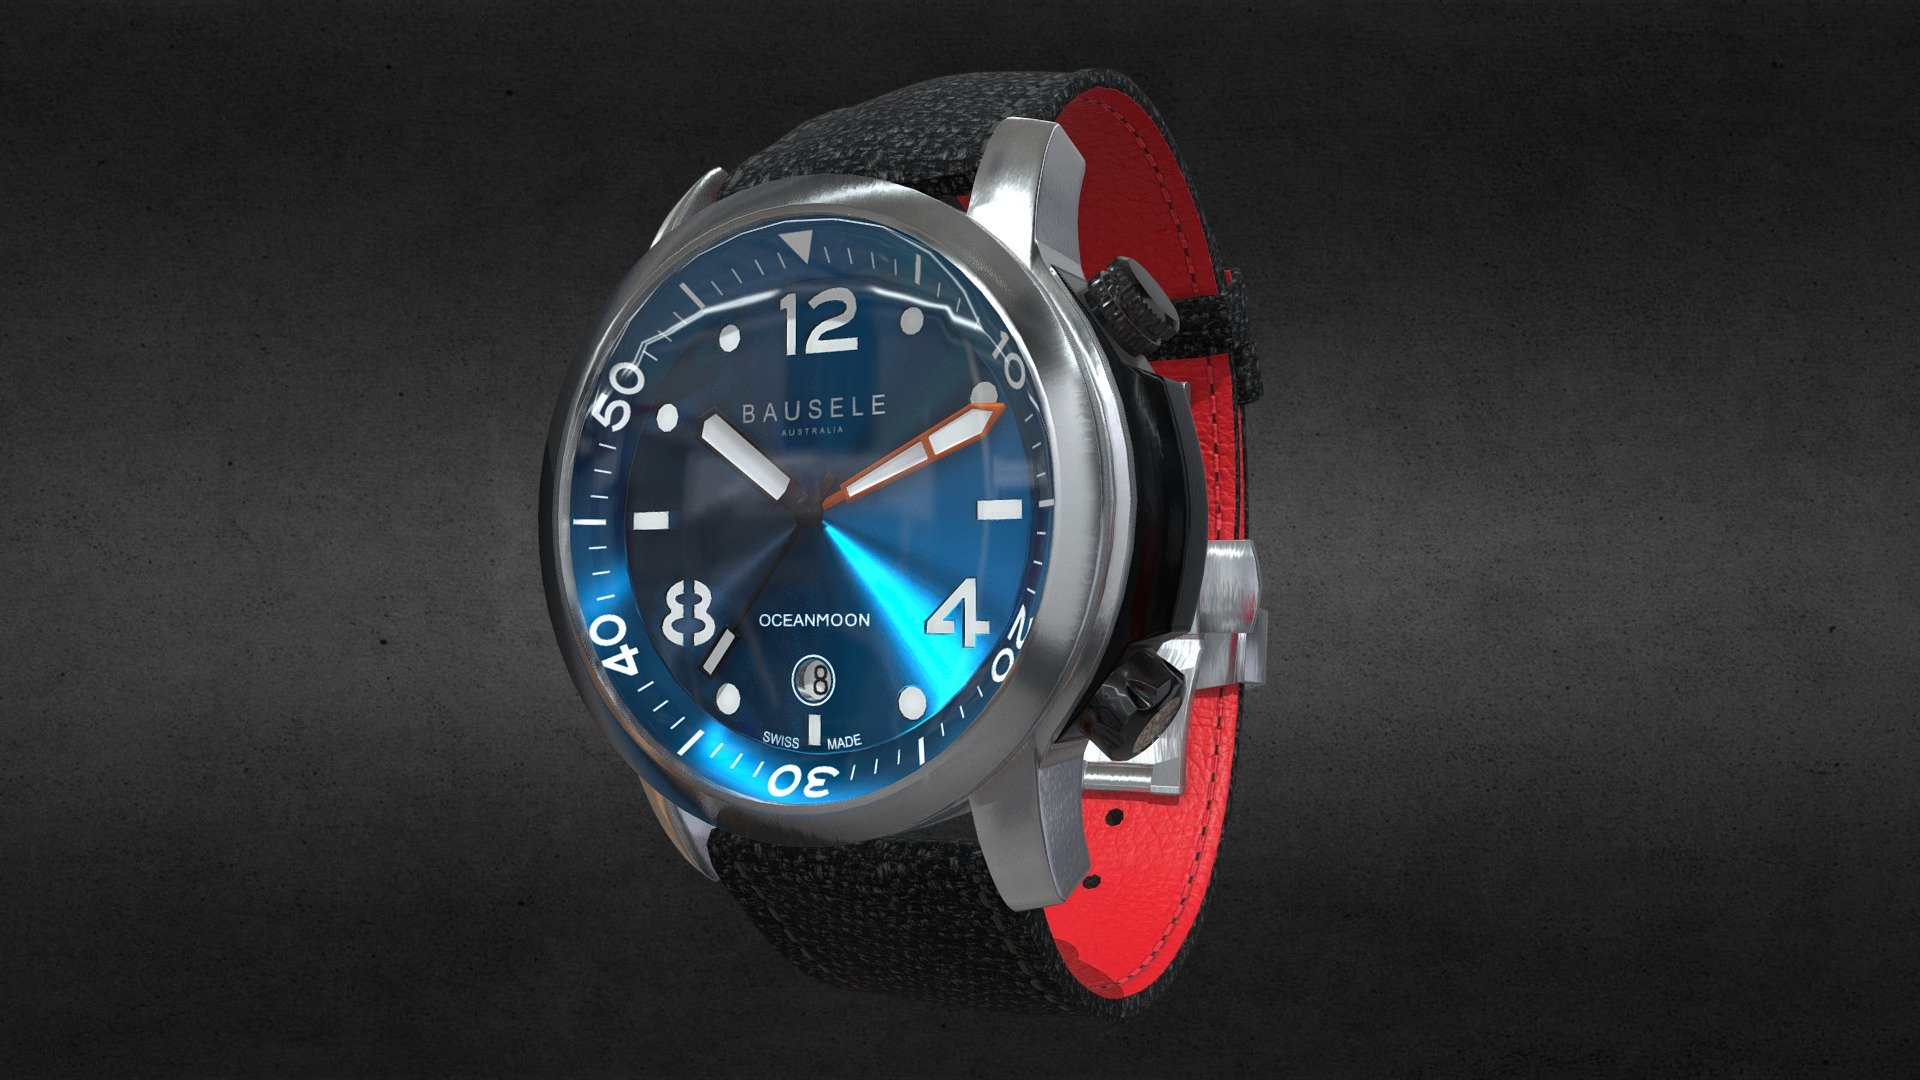 Awesome stainless steel Bausele Blue Oceanmoon Watch․
Use for Unreal Engine 4 and Unity3D. Try in augmented reality in the AR-Watches app. 
Links to the app: Android, iOS

Currently available for download in FBX format.

3D model developed by AR-Watches

Disclaimer: We do not own the design of the watch, we only made the 3D model 3d model